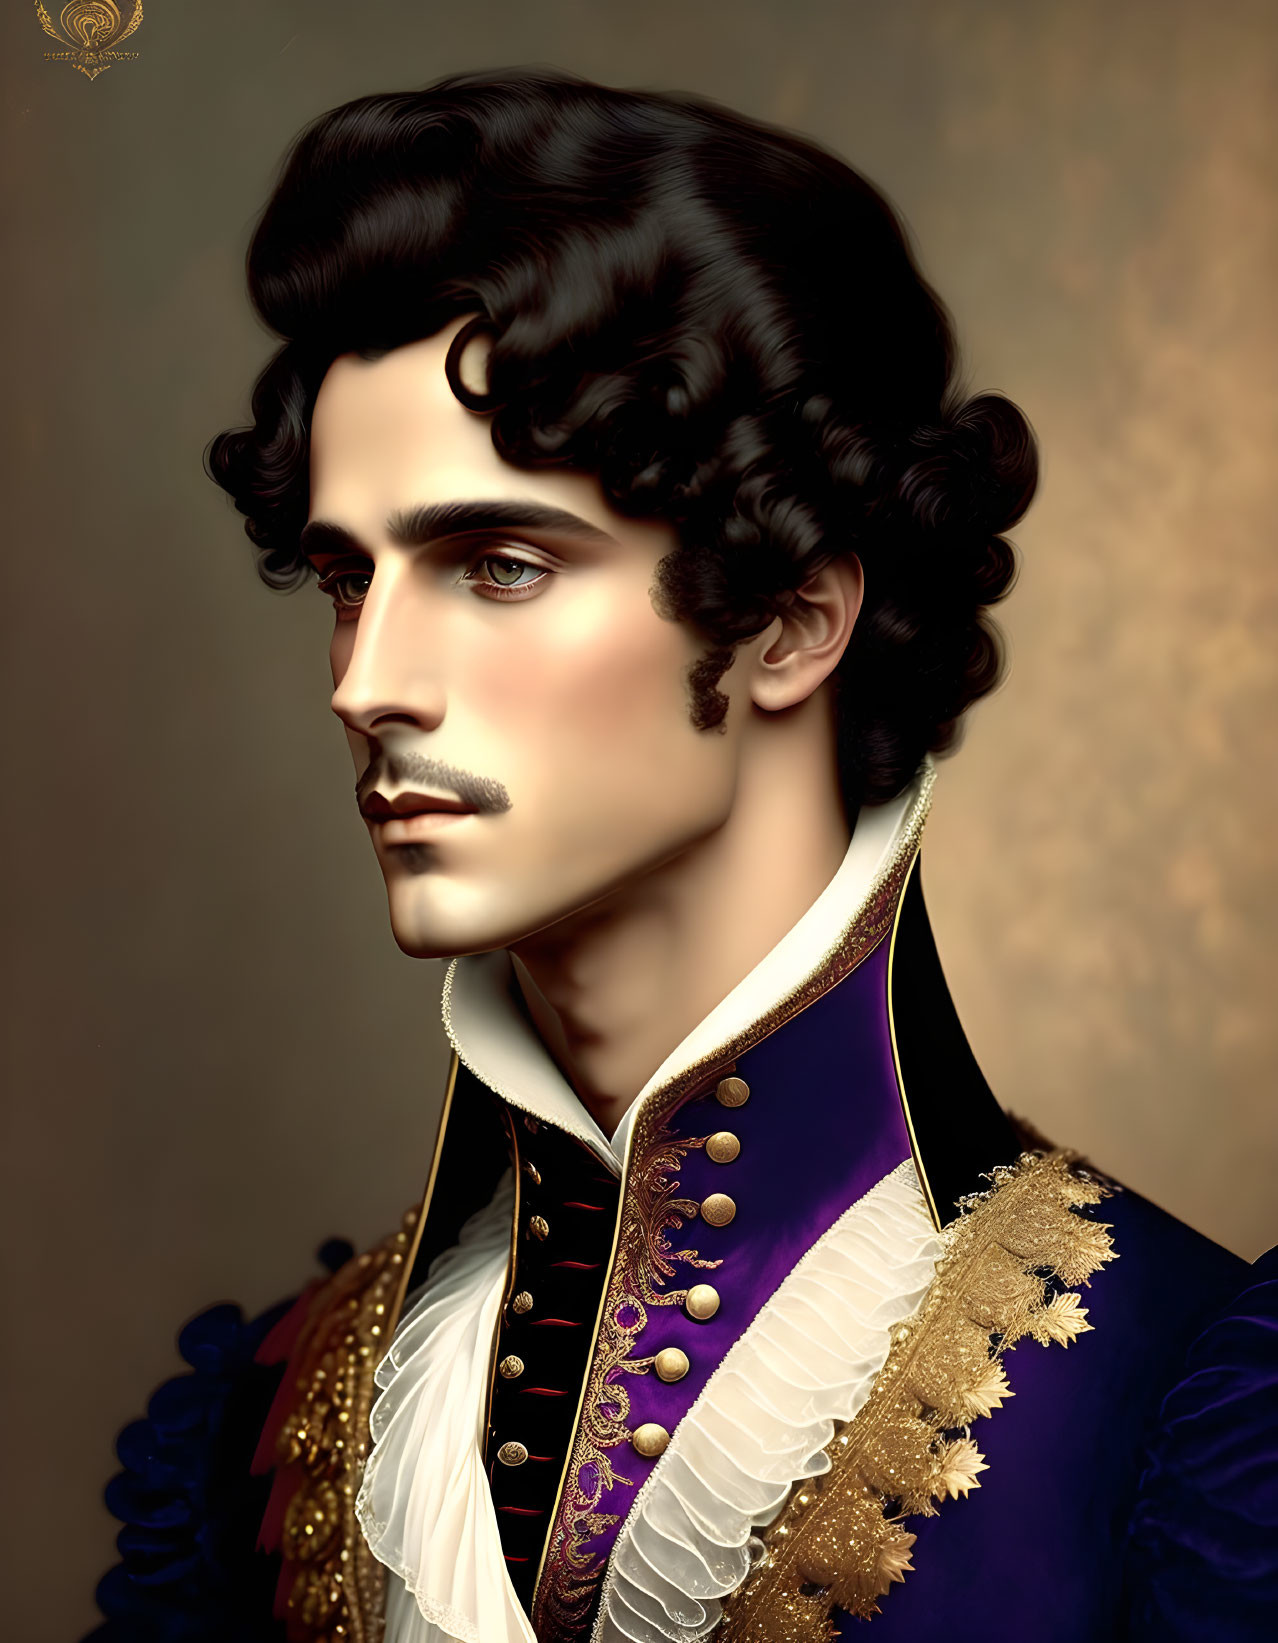 Prince from the year 1840!